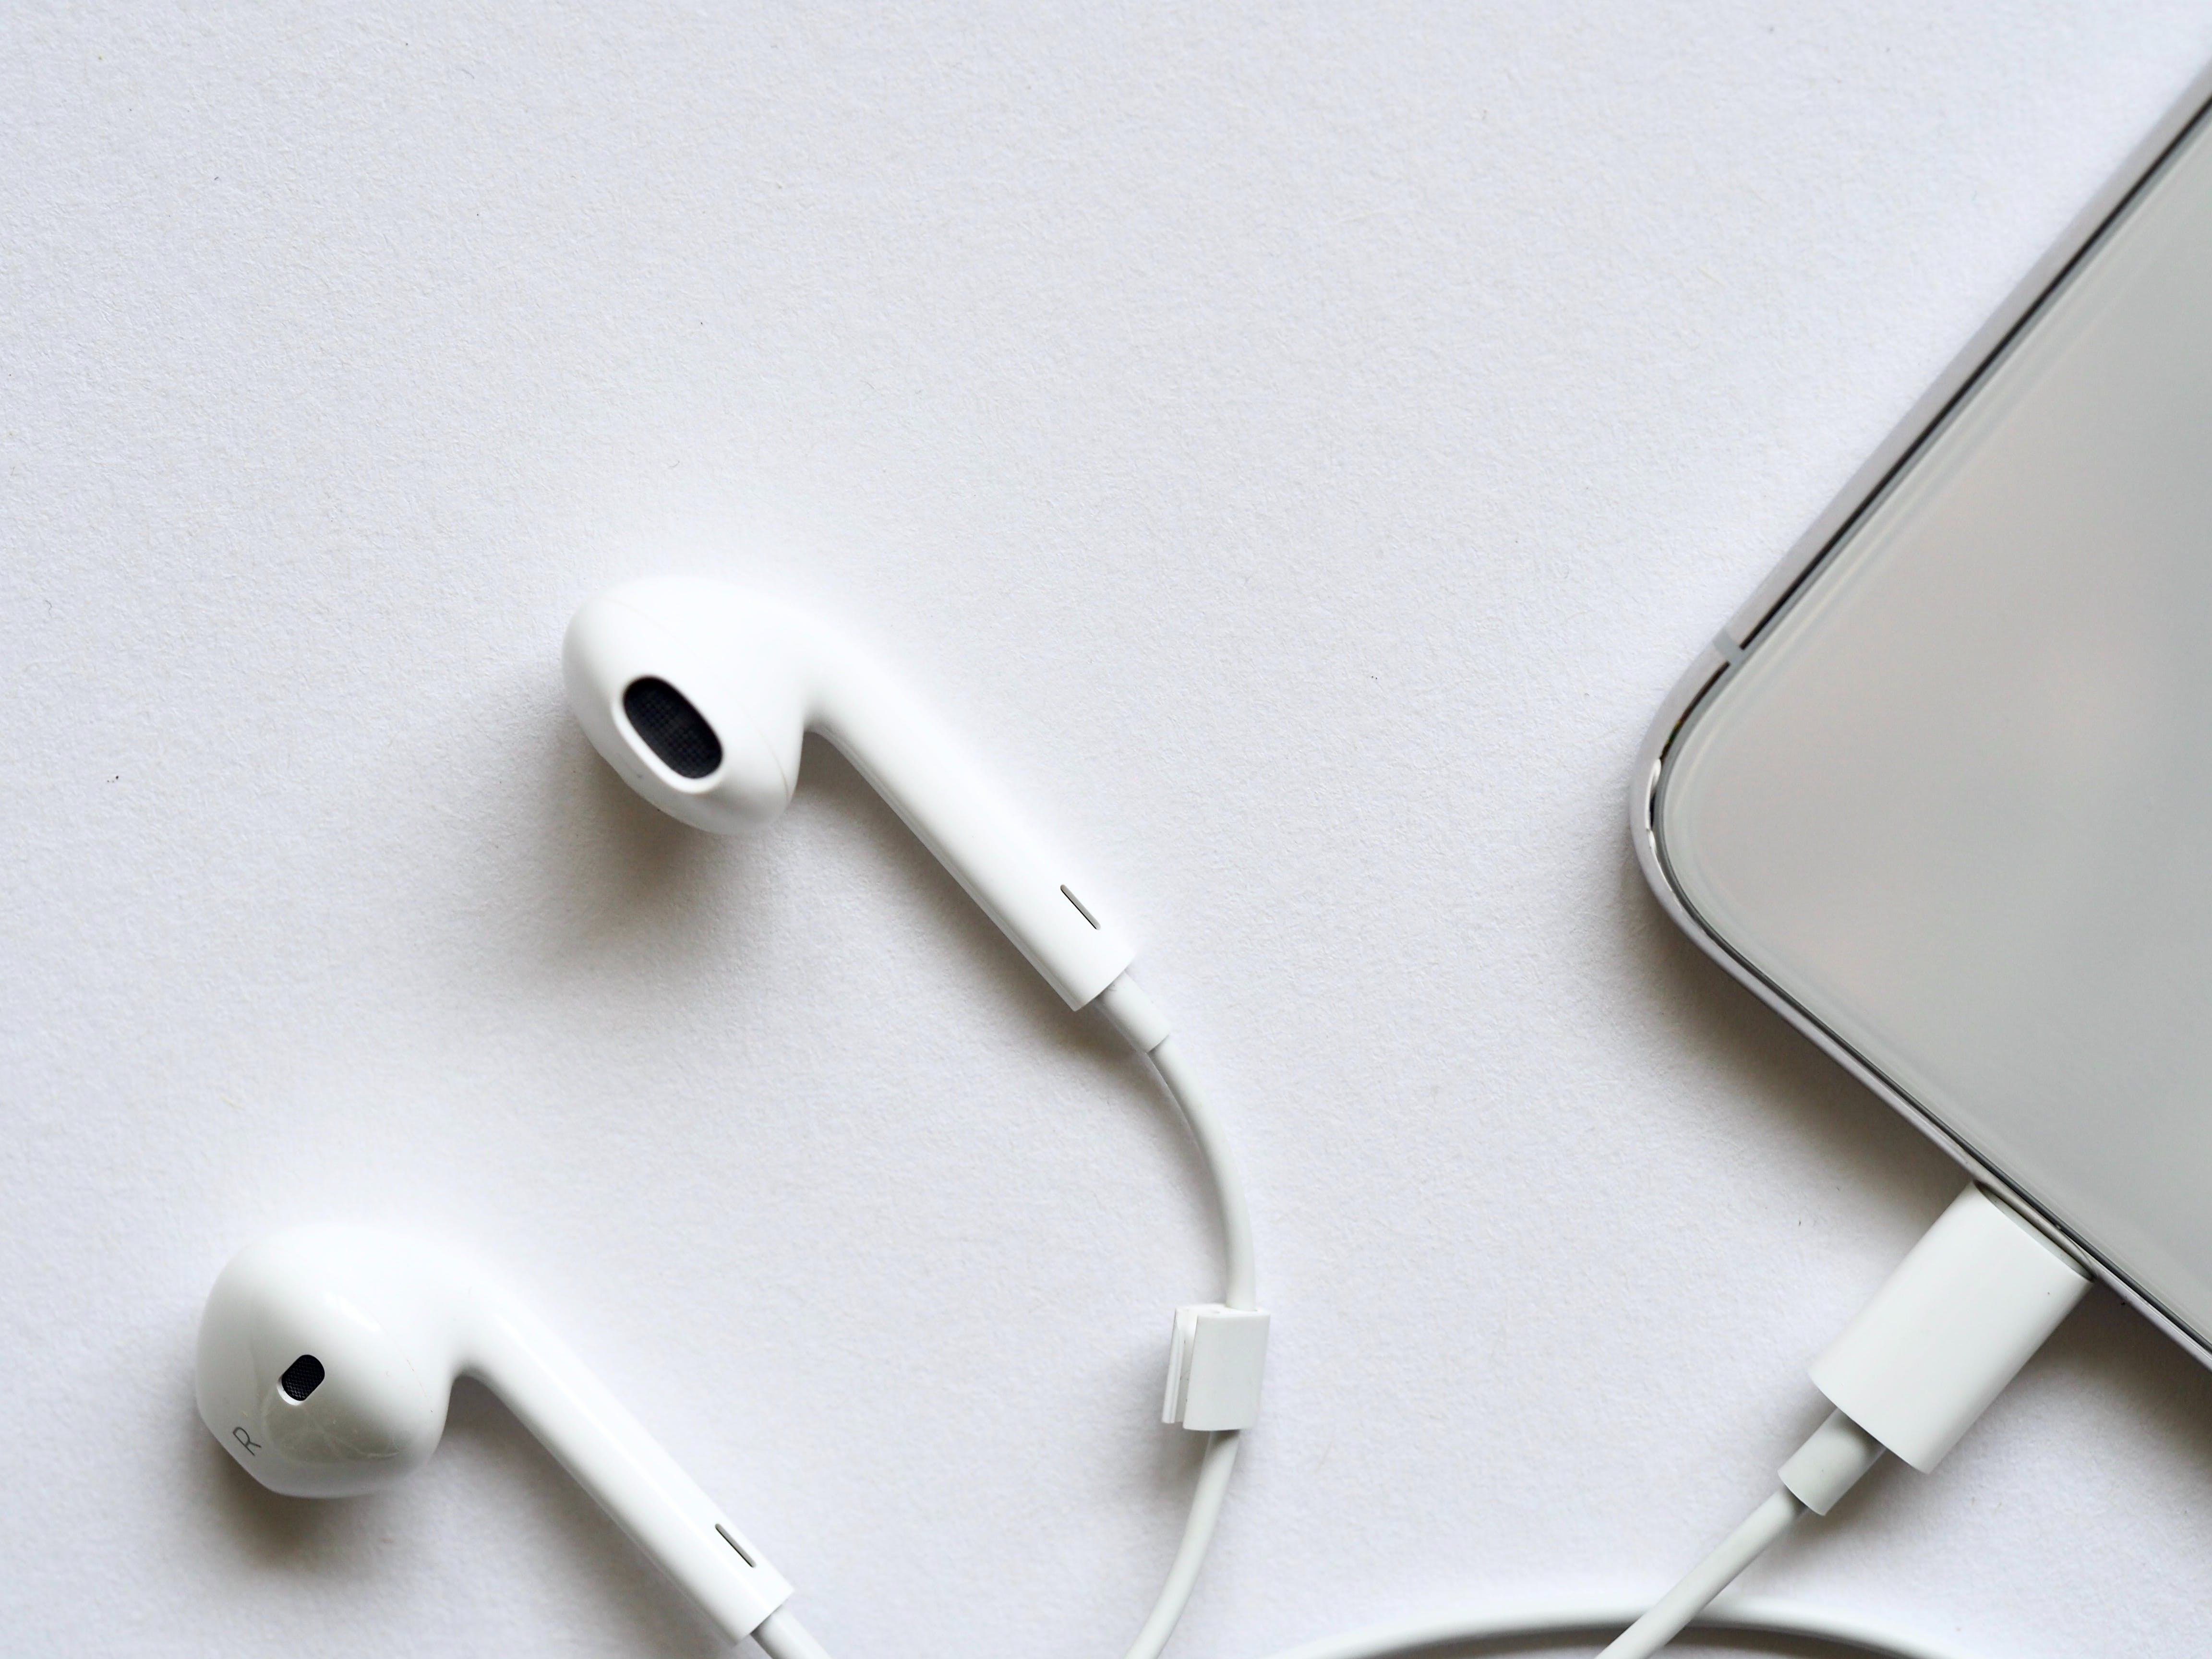 AirPods vs. Earbuds: Which is Better?